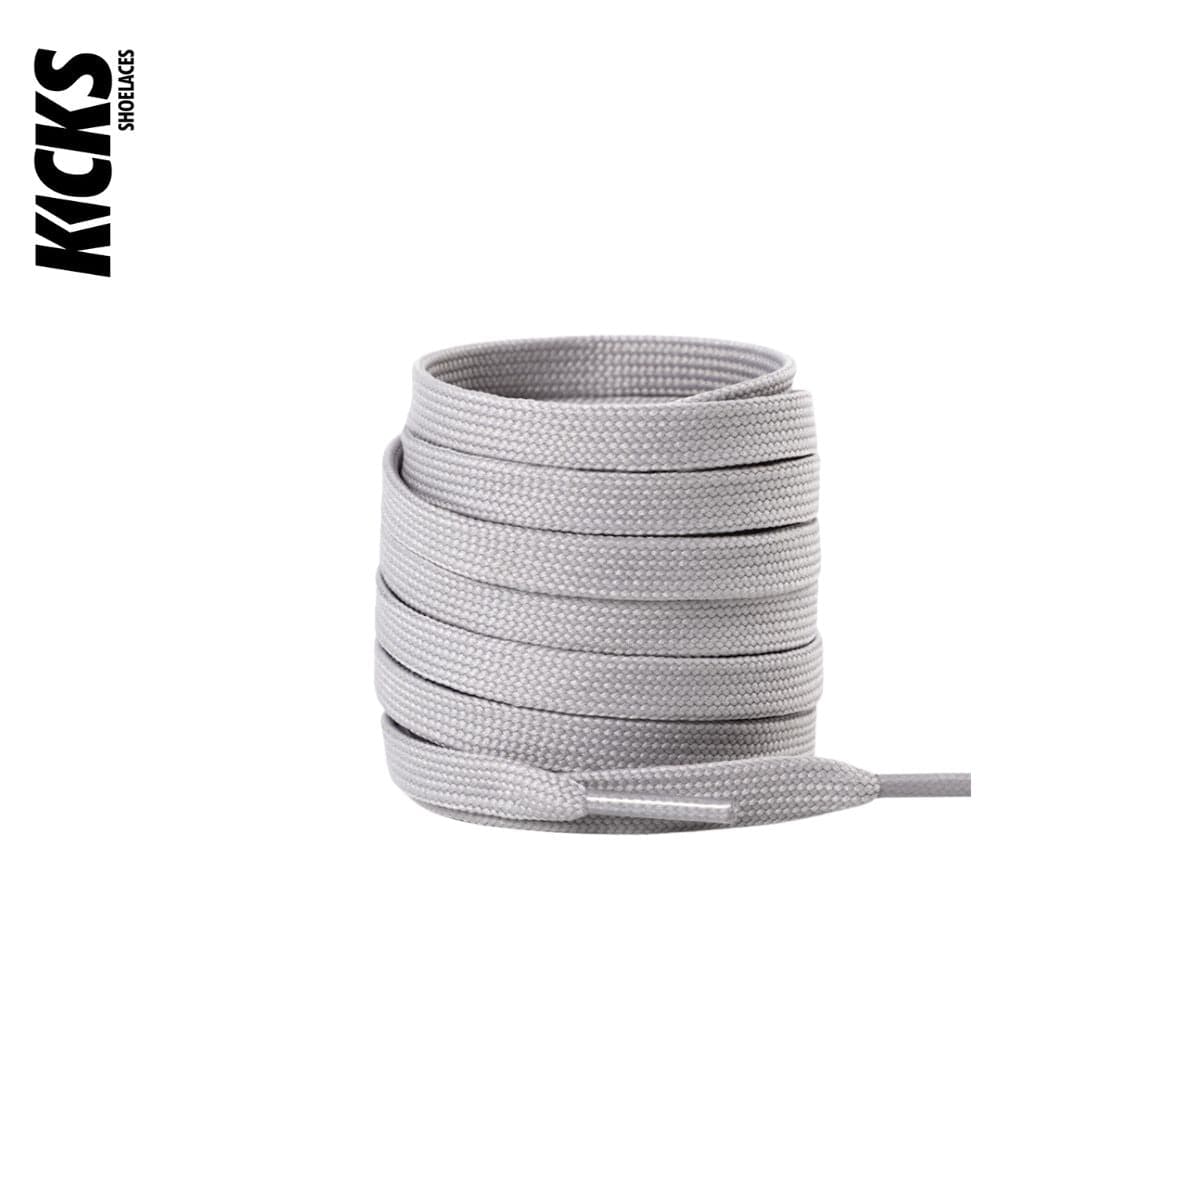 Adidas NMD Shoelace Replacements - Kicks Shoelaces